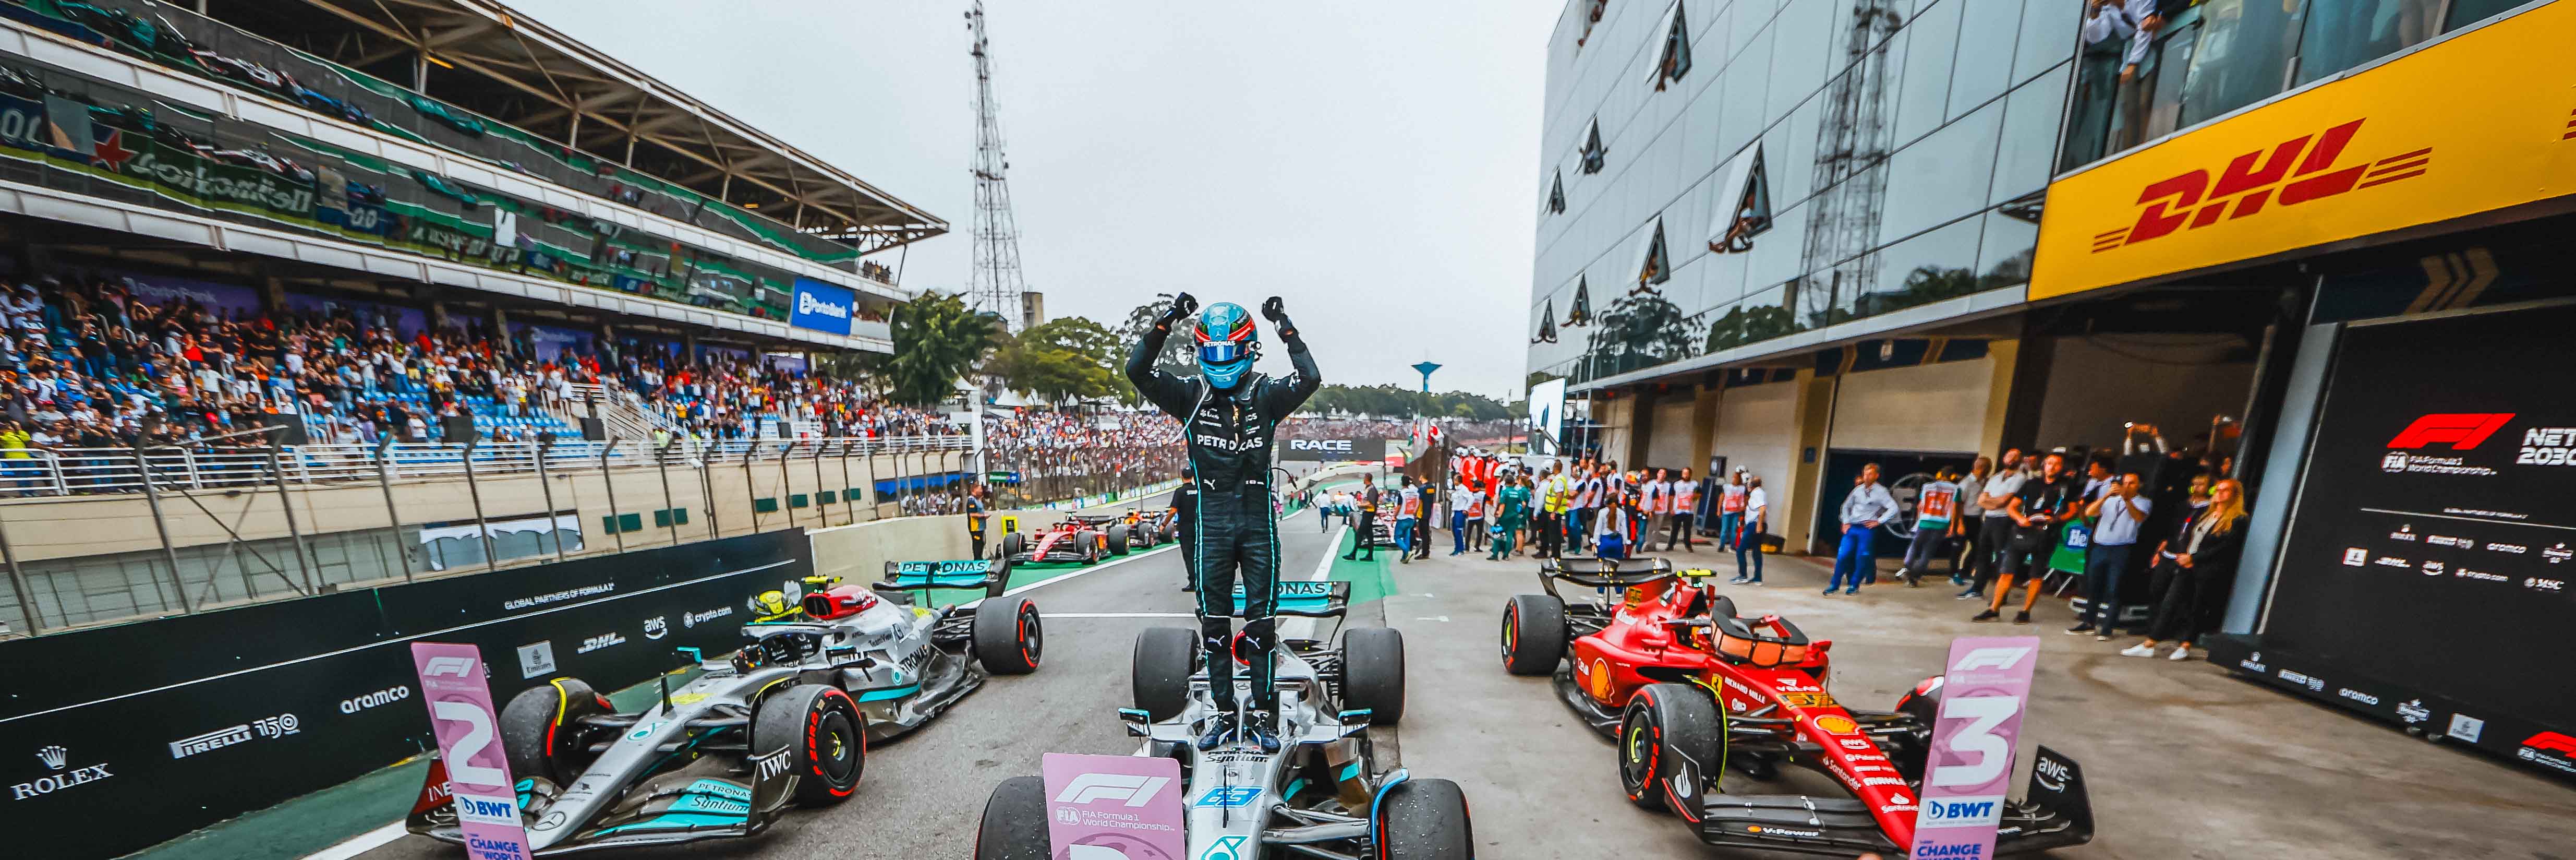 George Russell celebrating his first F1 win at the 2022 Brazilian Grand Prix